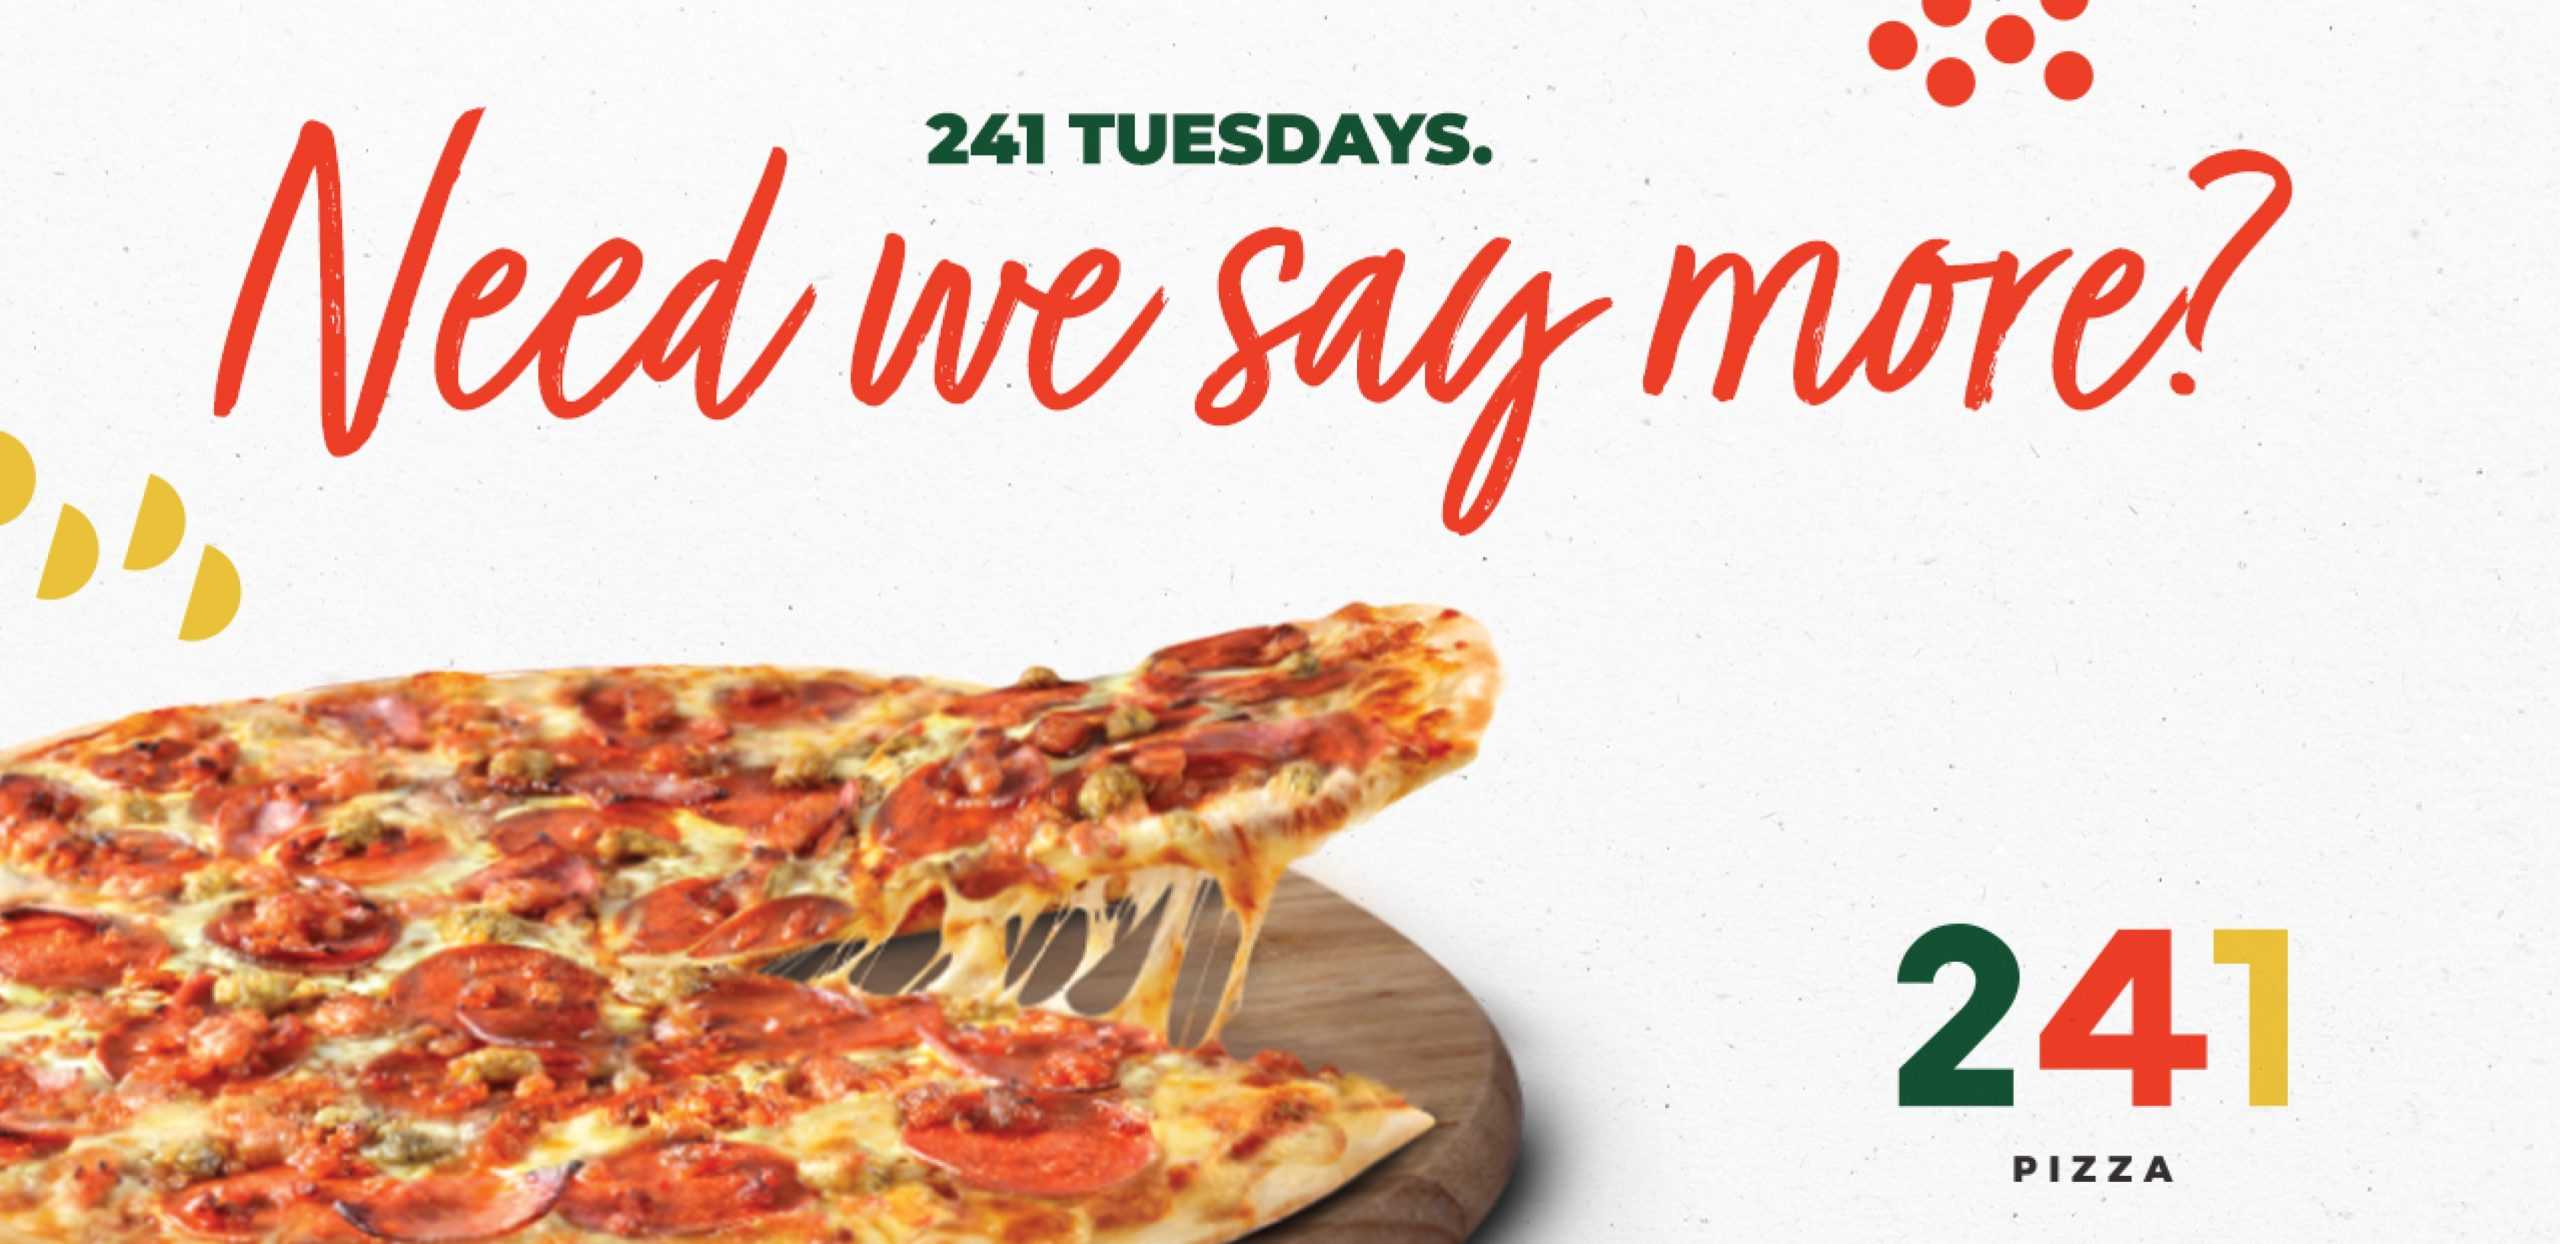 241 Pizza - 241 Tuesdays - text on the image says Need we say more